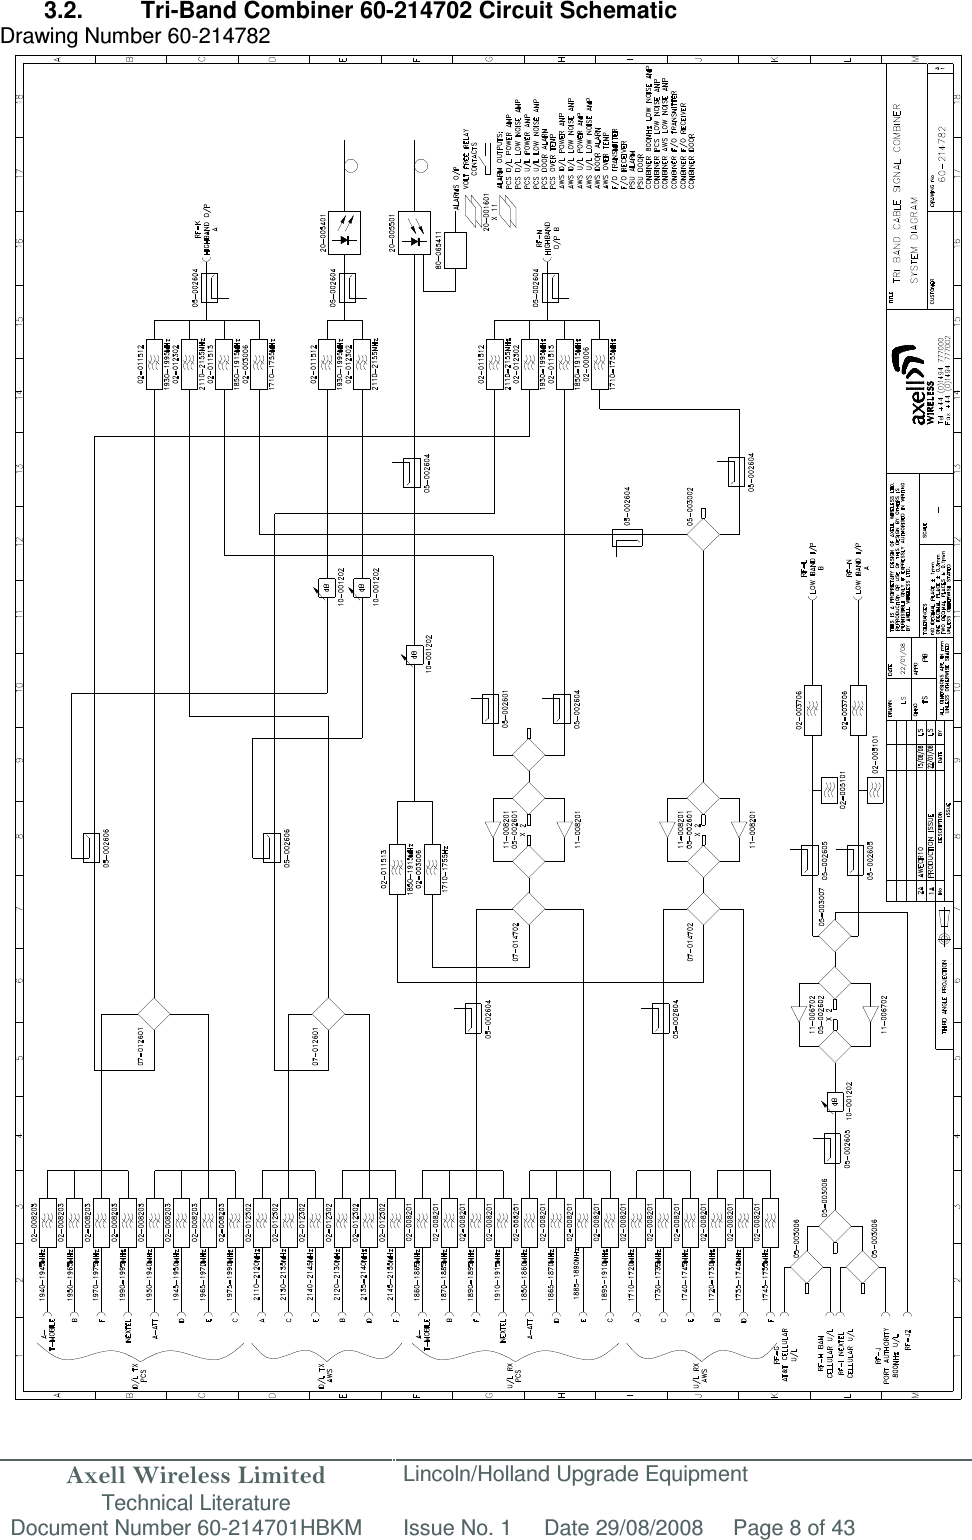 Axell Wireless Limited Technical Literature Lincoln/Holland Upgrade Equipment Document Number 60-214701HBKM Issue No. 1 Date 29/08/2008 Page 8 of 43   3.2.  Tri-Band Combiner 60-214702 Circuit Schematic  Drawing Number 60-214782                                                        